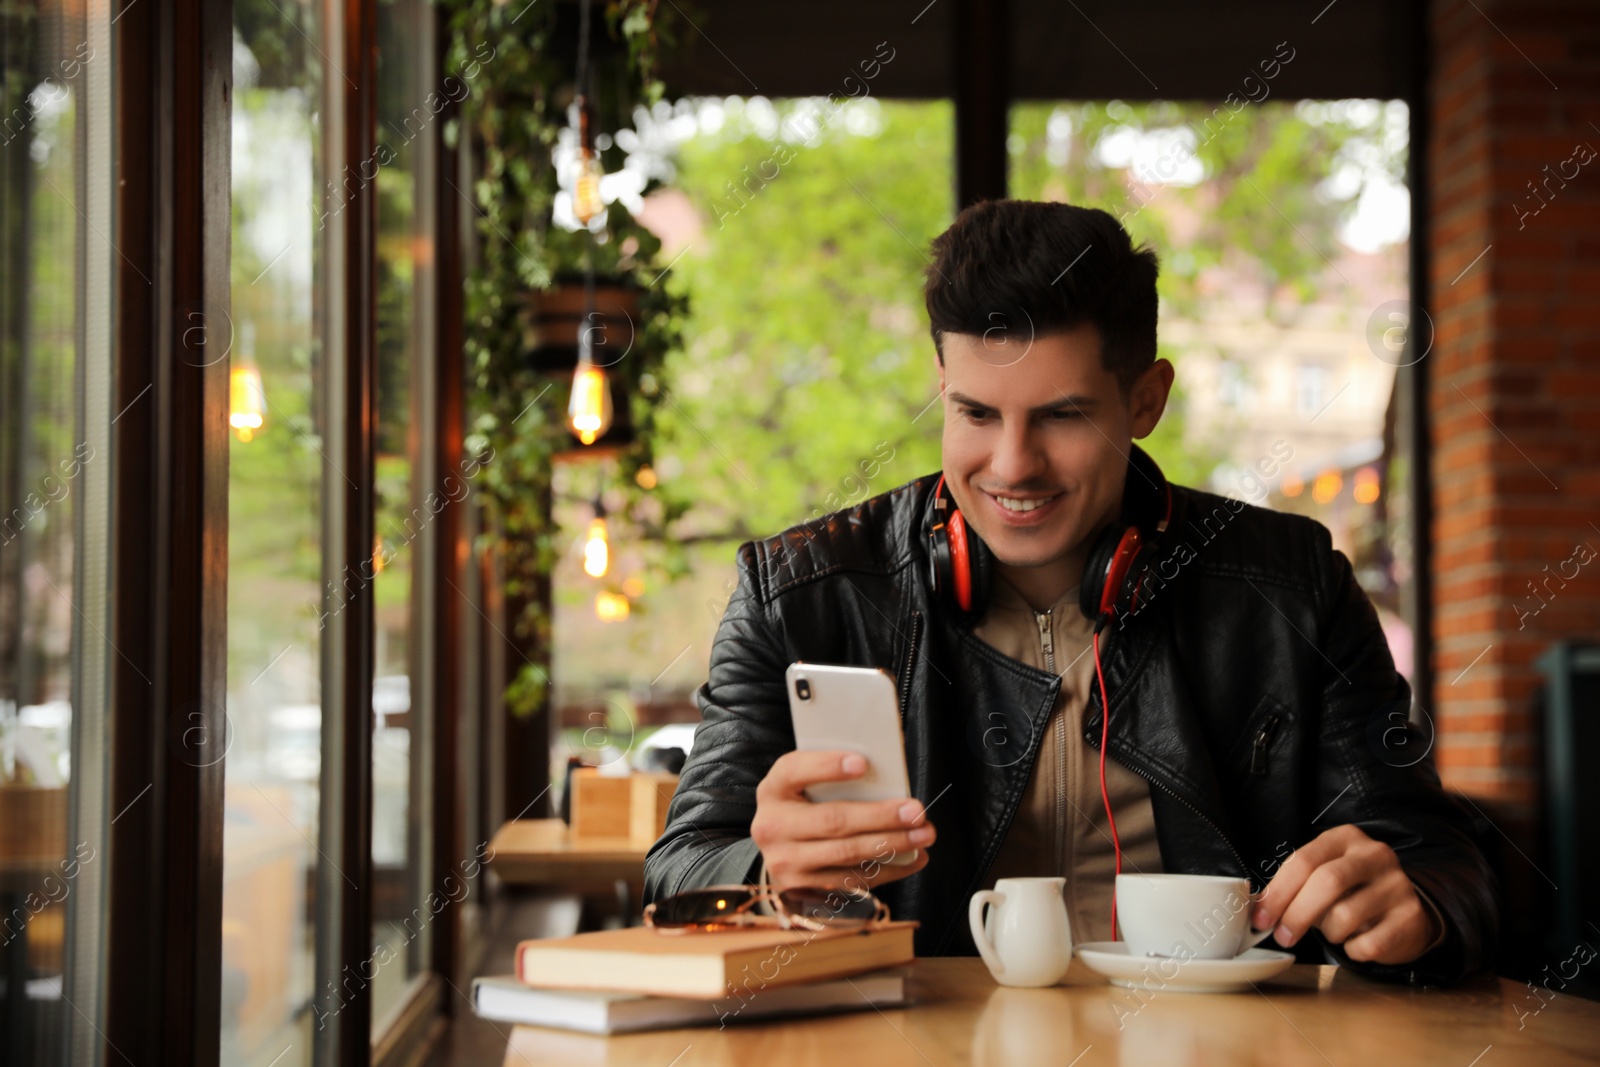 Photo of Man with headphones and smartphone at table in cafe